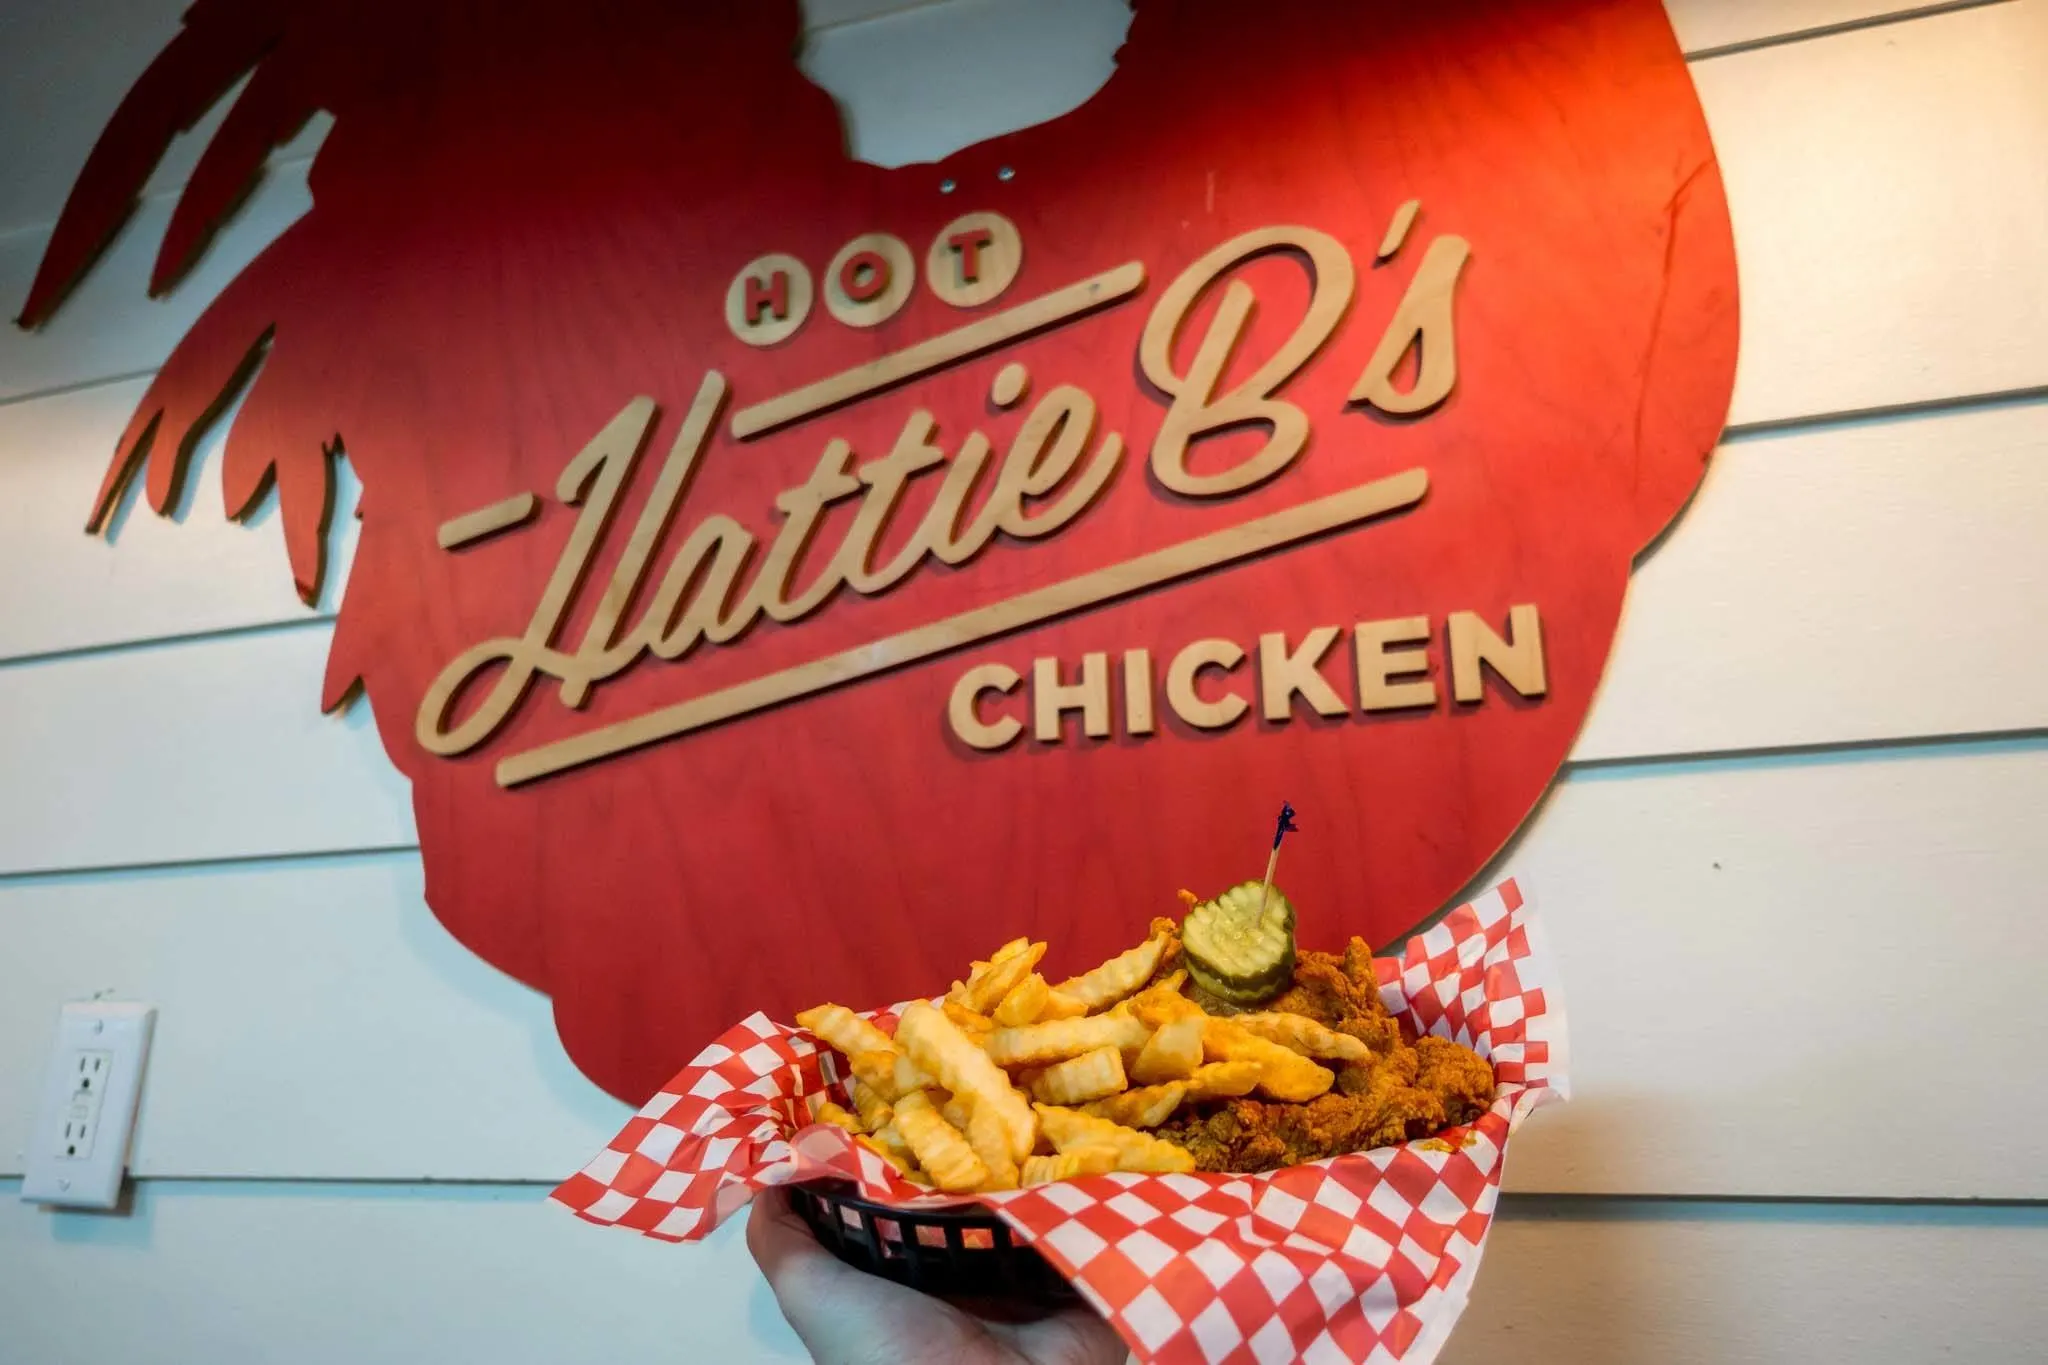 Basket of hot chicken in front of a Hattie B's sign